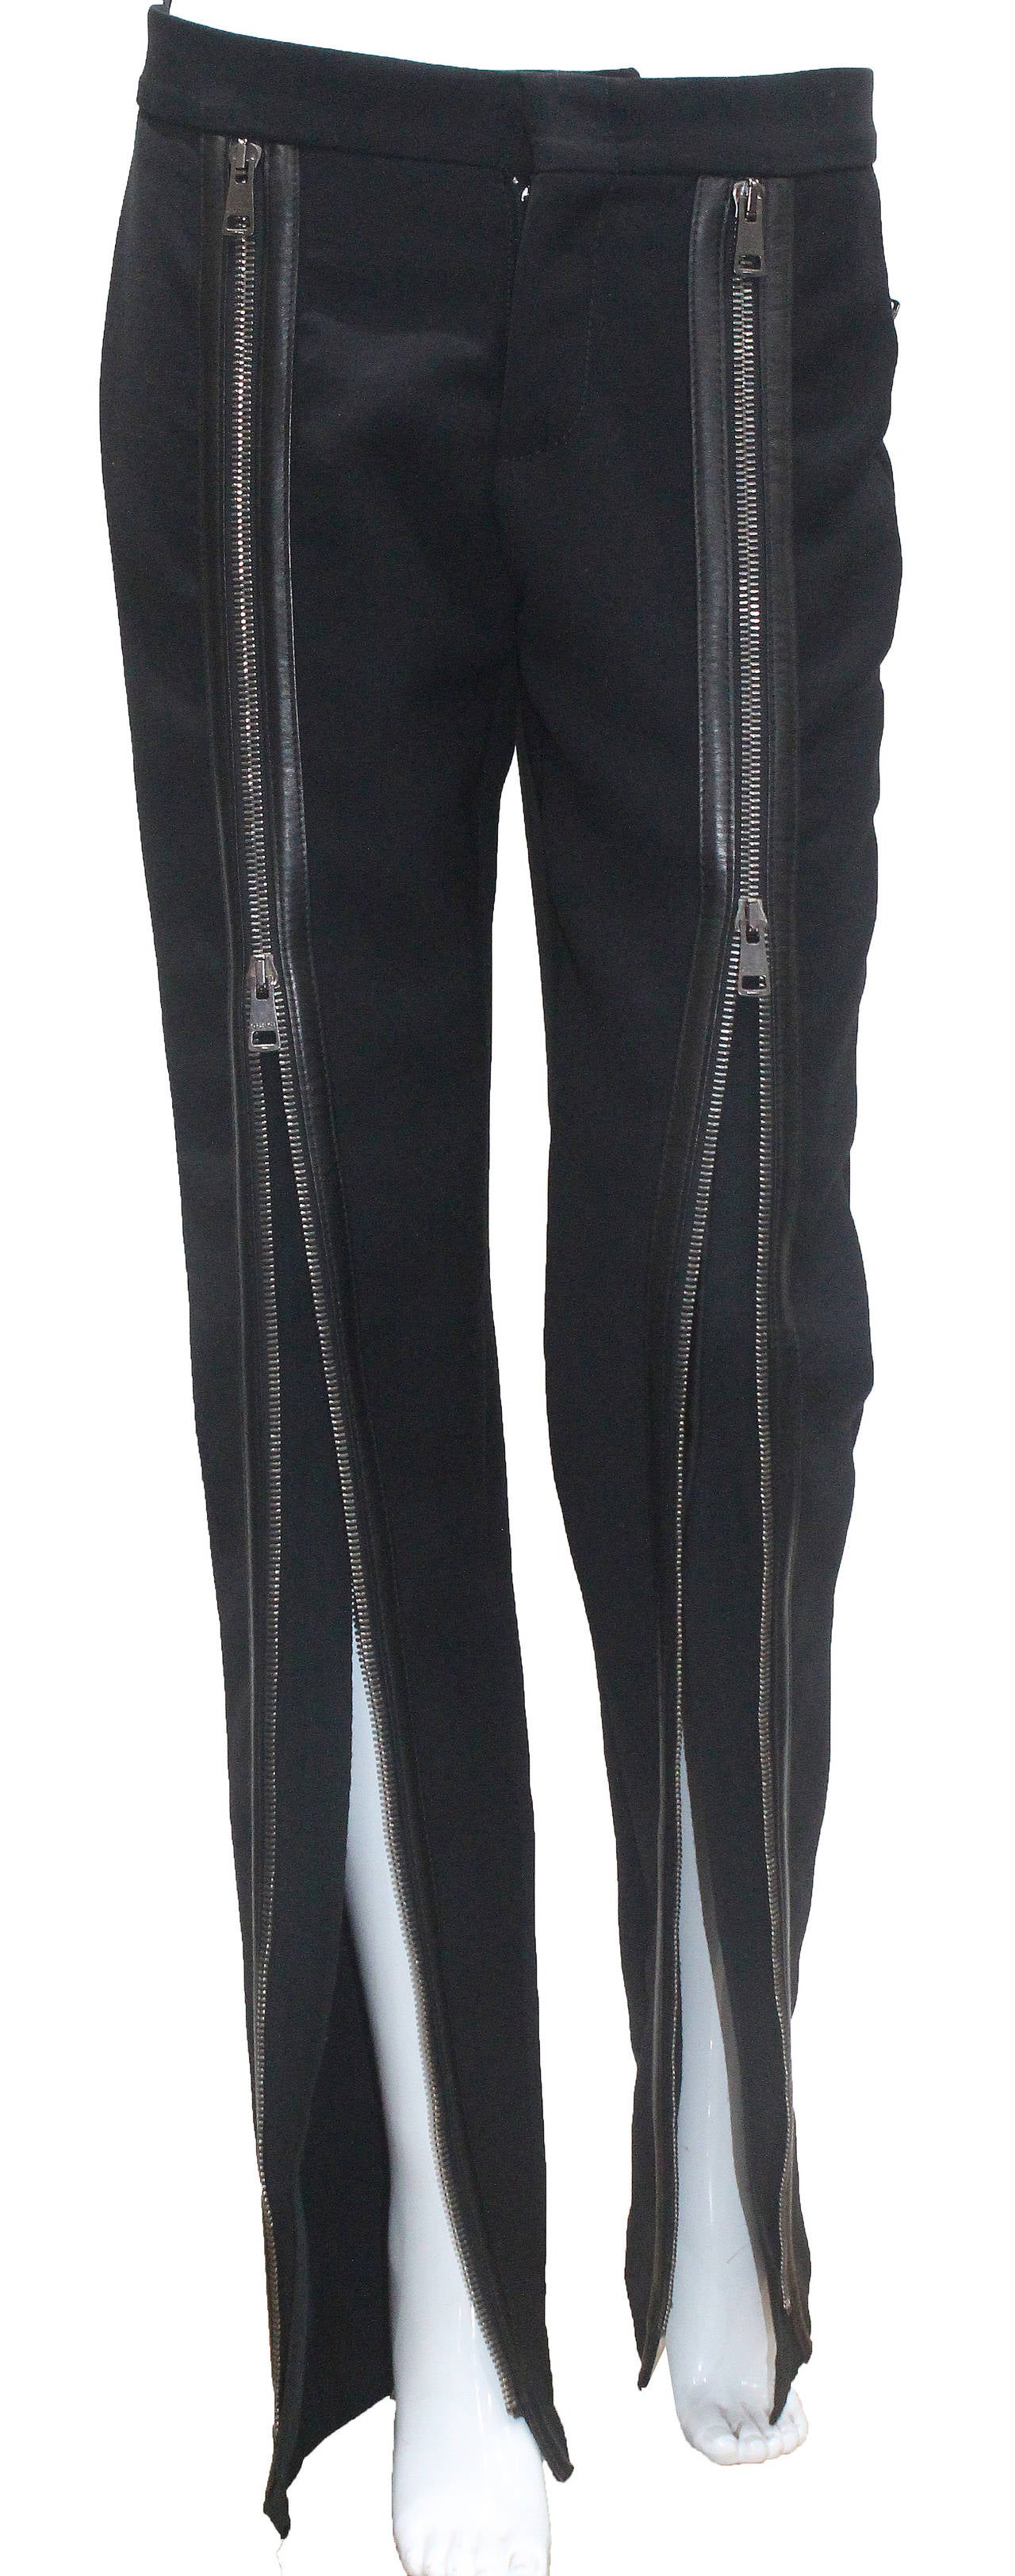 Black Iconic and rare Tom Ford for Gucci runway zipper leather pants c. 2001